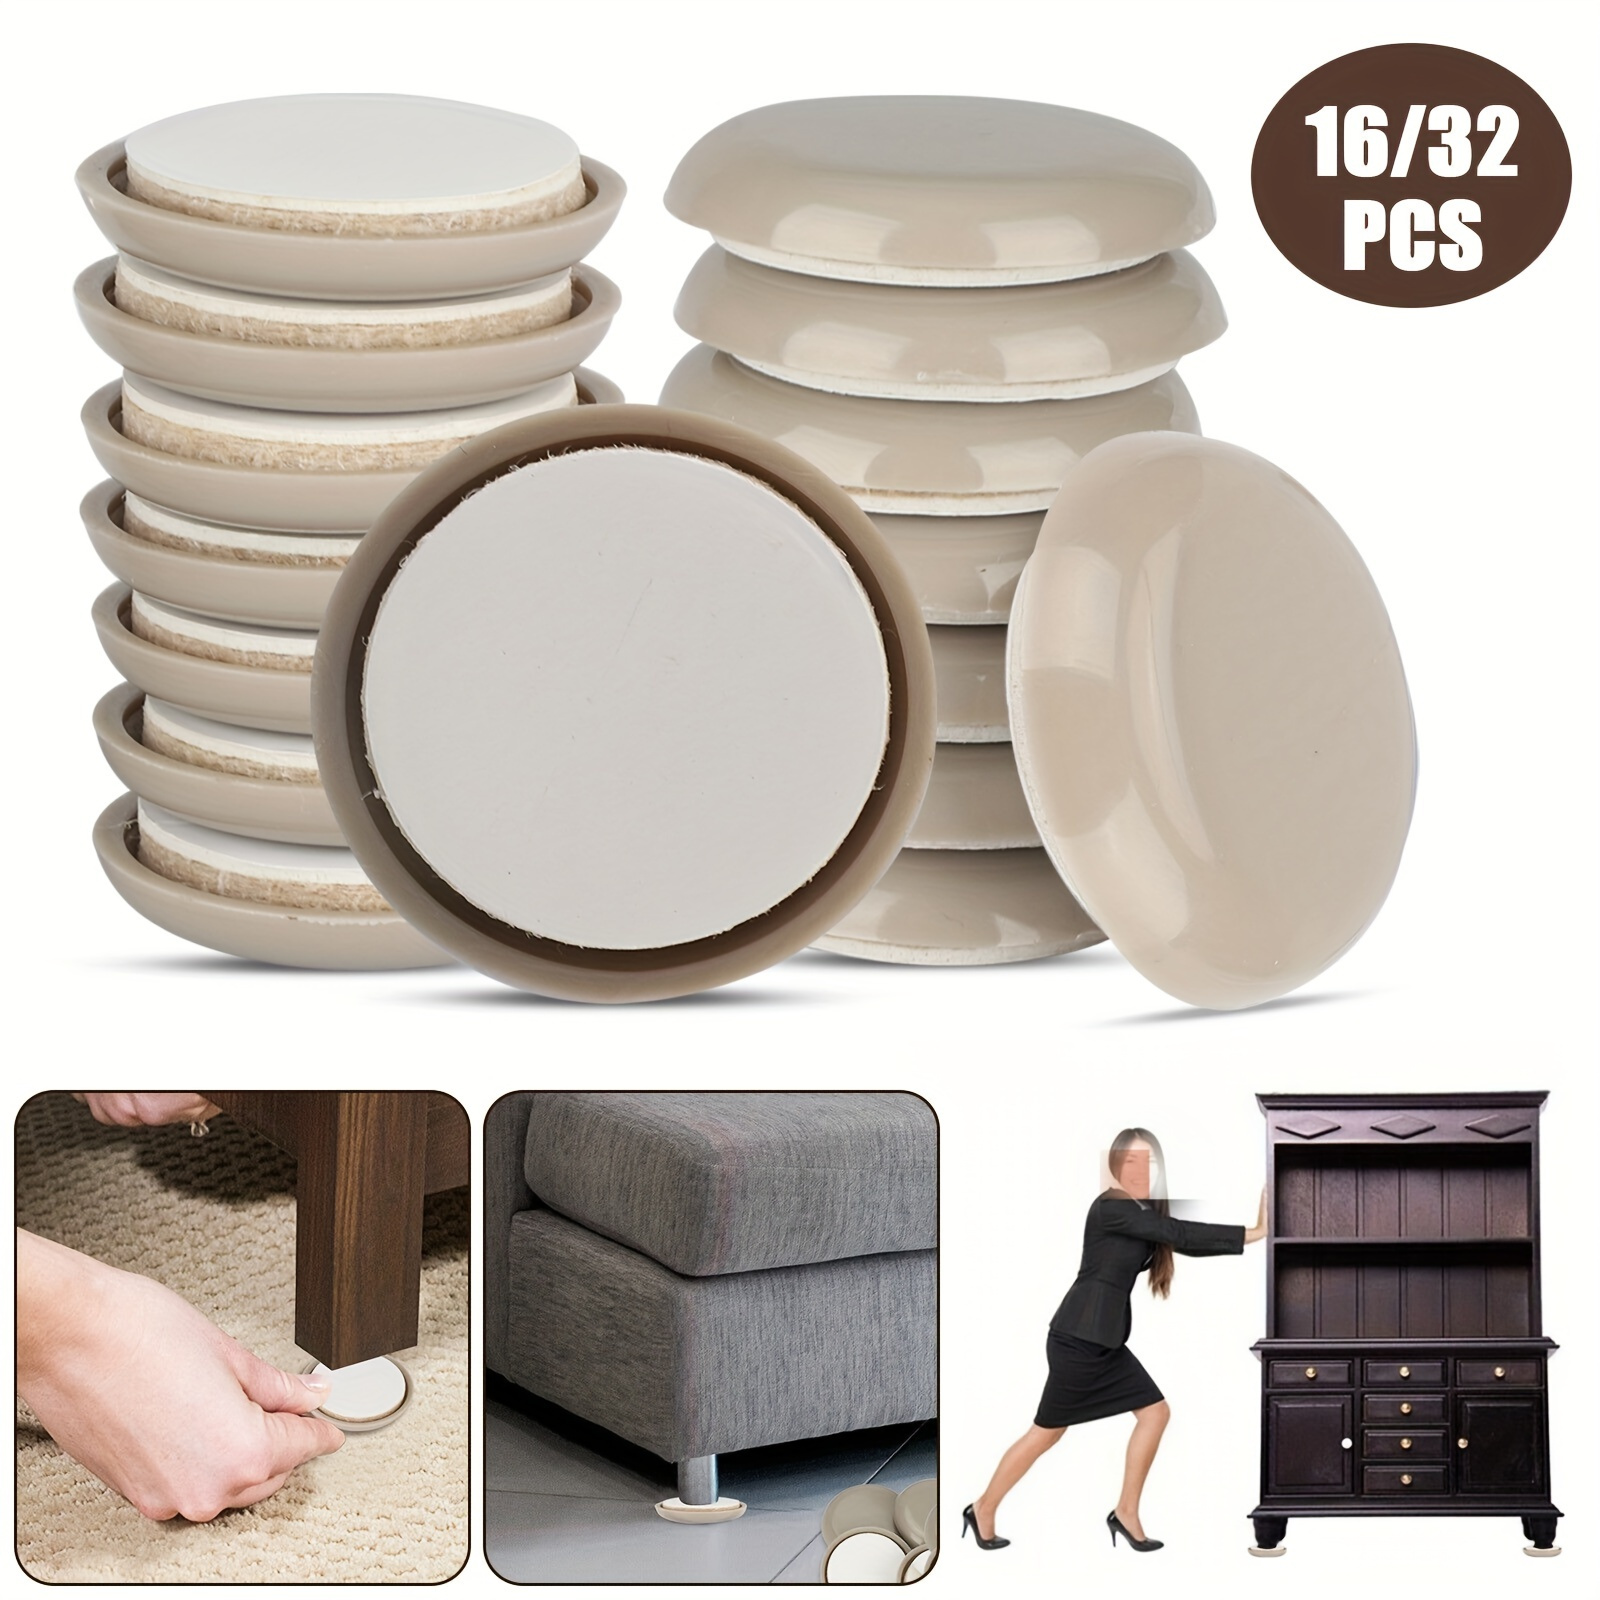 8pcs Furniture Sliders, Plastic Sliders For Furniture Legs, 3.5/4.7 Inch  Furniture Carpet Moving Pads, Chair Leg Floor Protectors Movers, Coasters  For